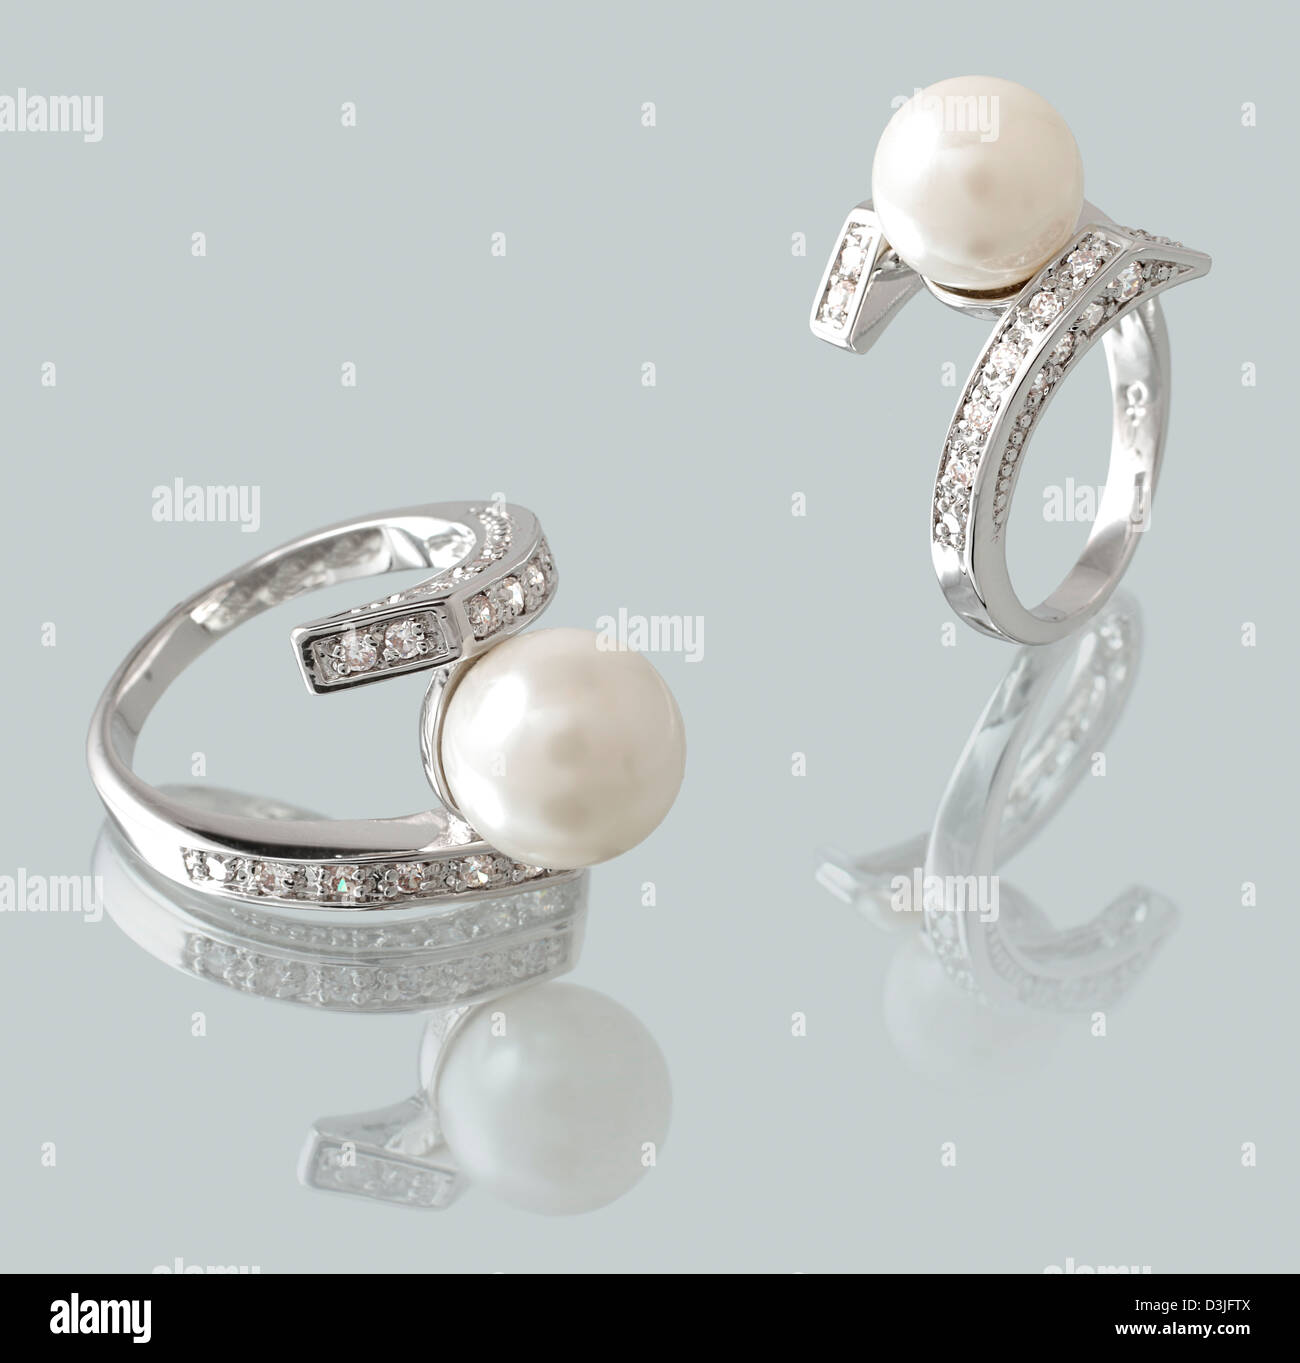 Silver ring with pearl and diamonds Stock Photo